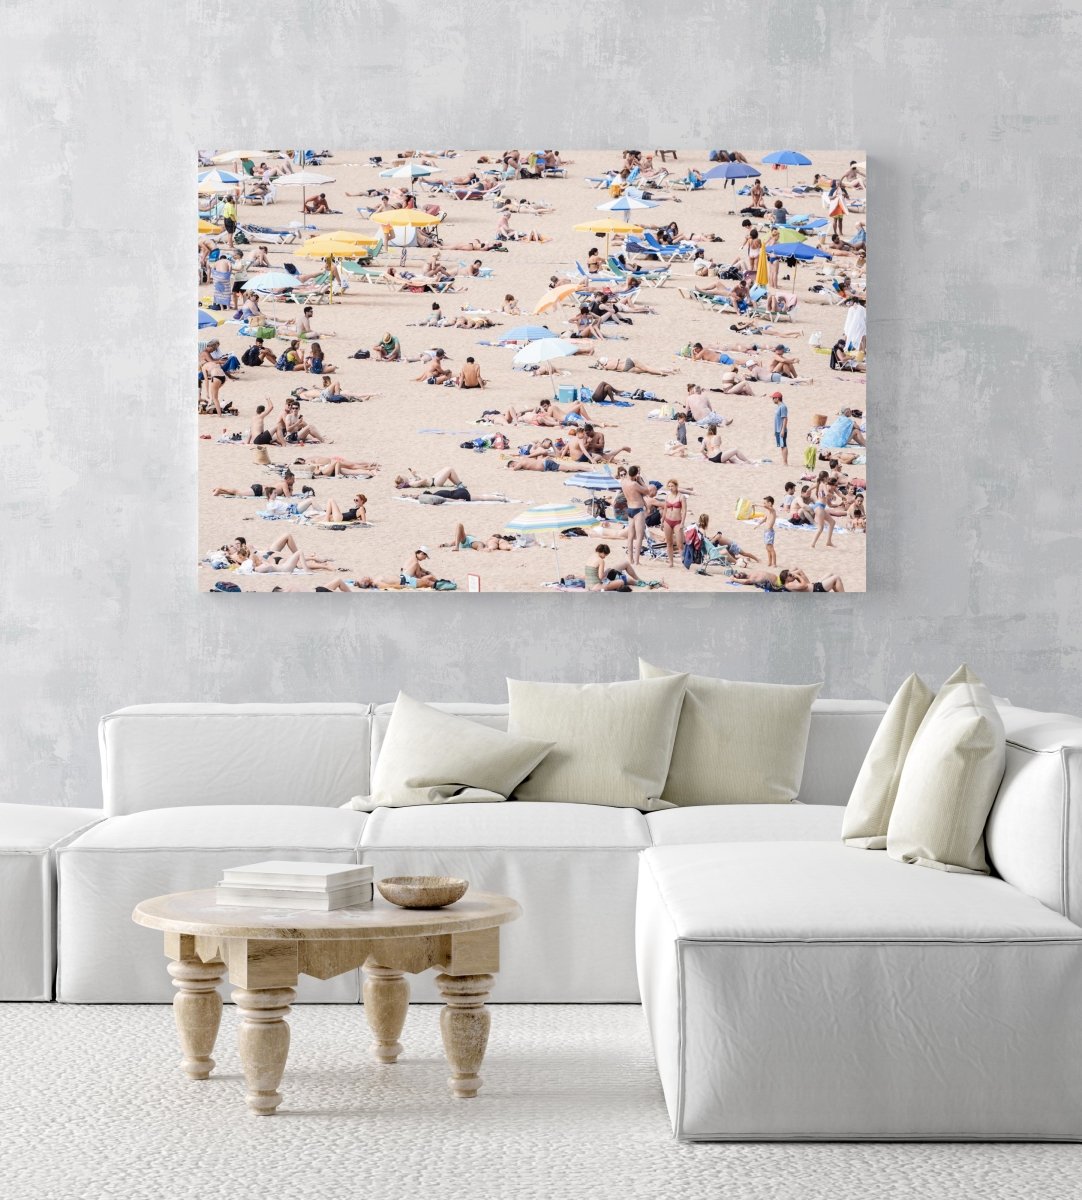 Very crowded beach full of people in Tossa de Mar in an acrylic/perspex frame